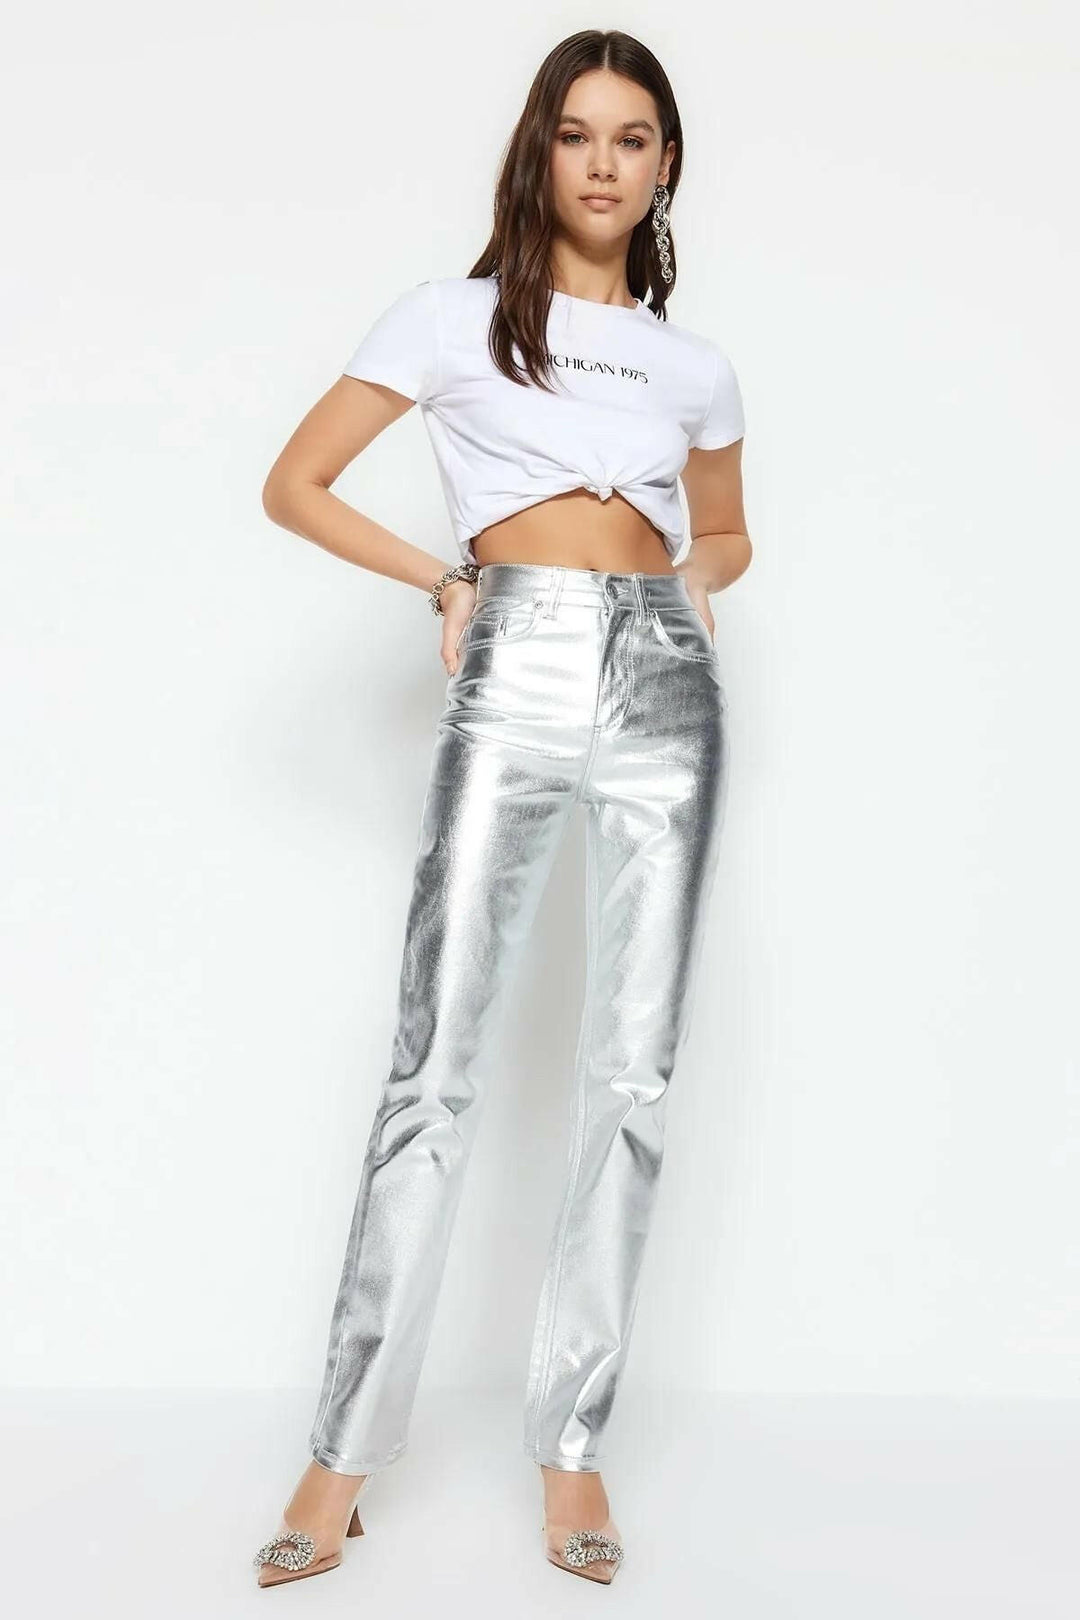 Silver Shiny Metallic Print High-Waisted Straight Jeans- Noxlook